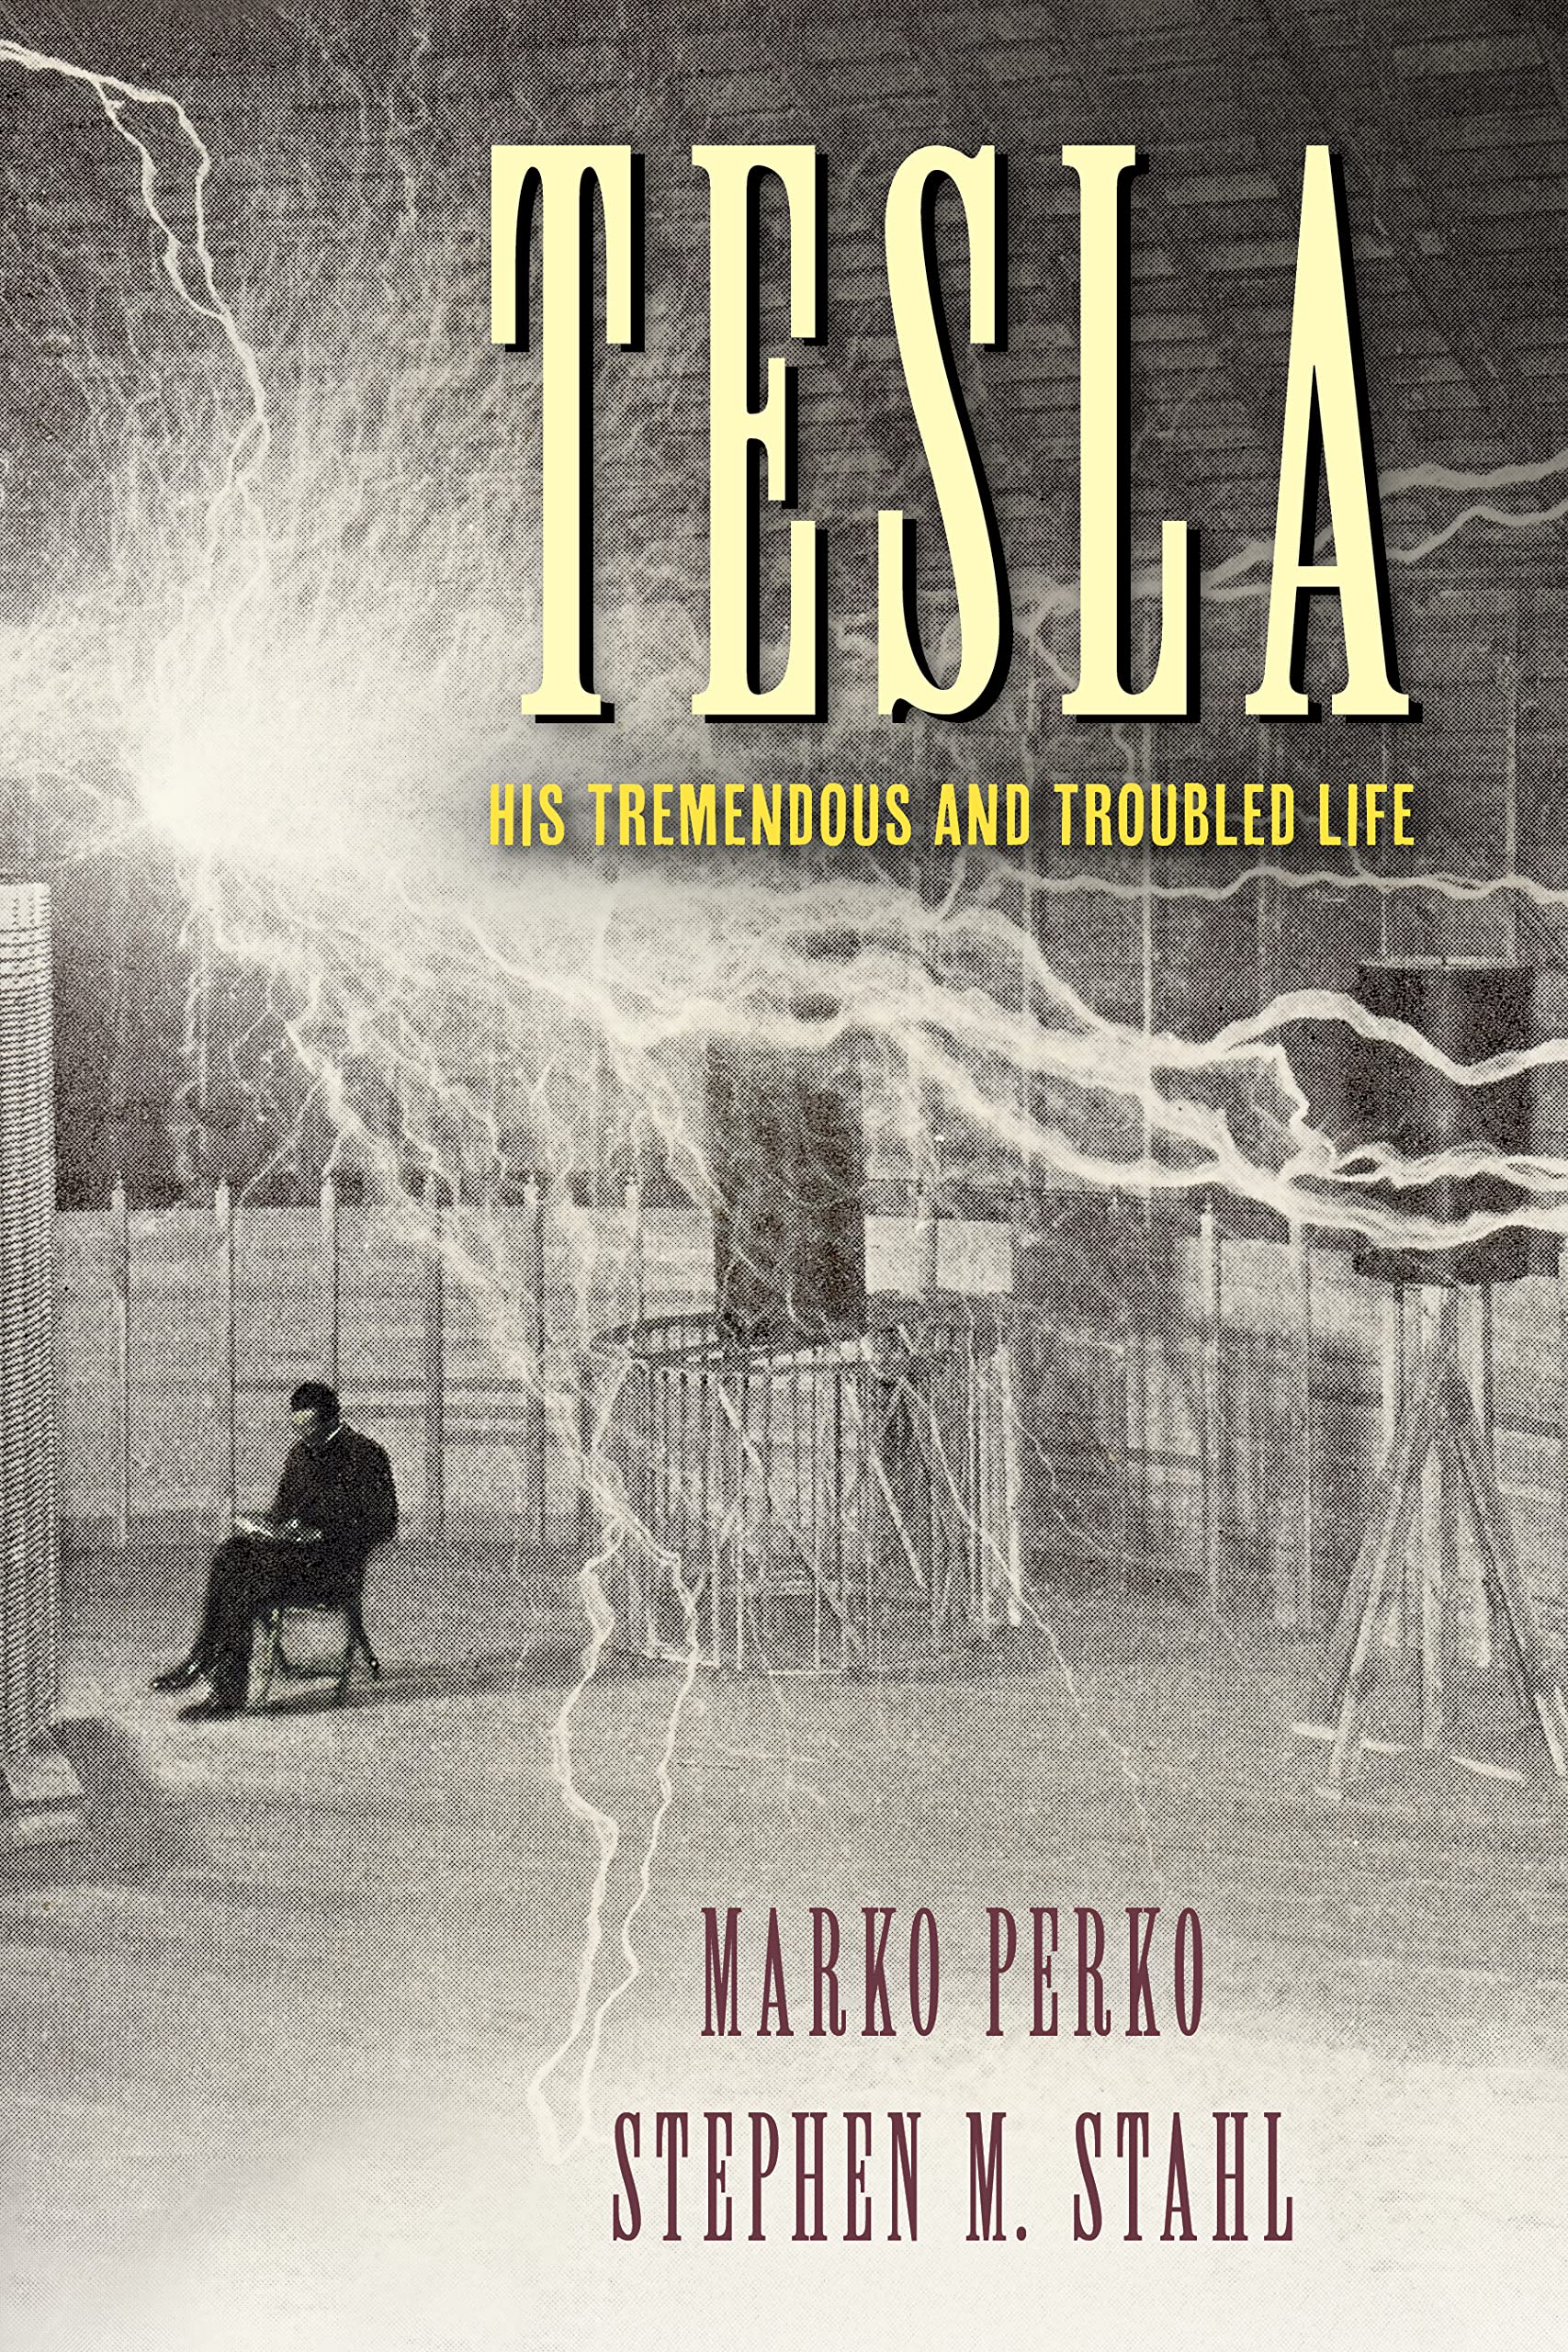 Tesla: His Tremendous and Troubled Life by Marko Perko and Stephen M. Stahl